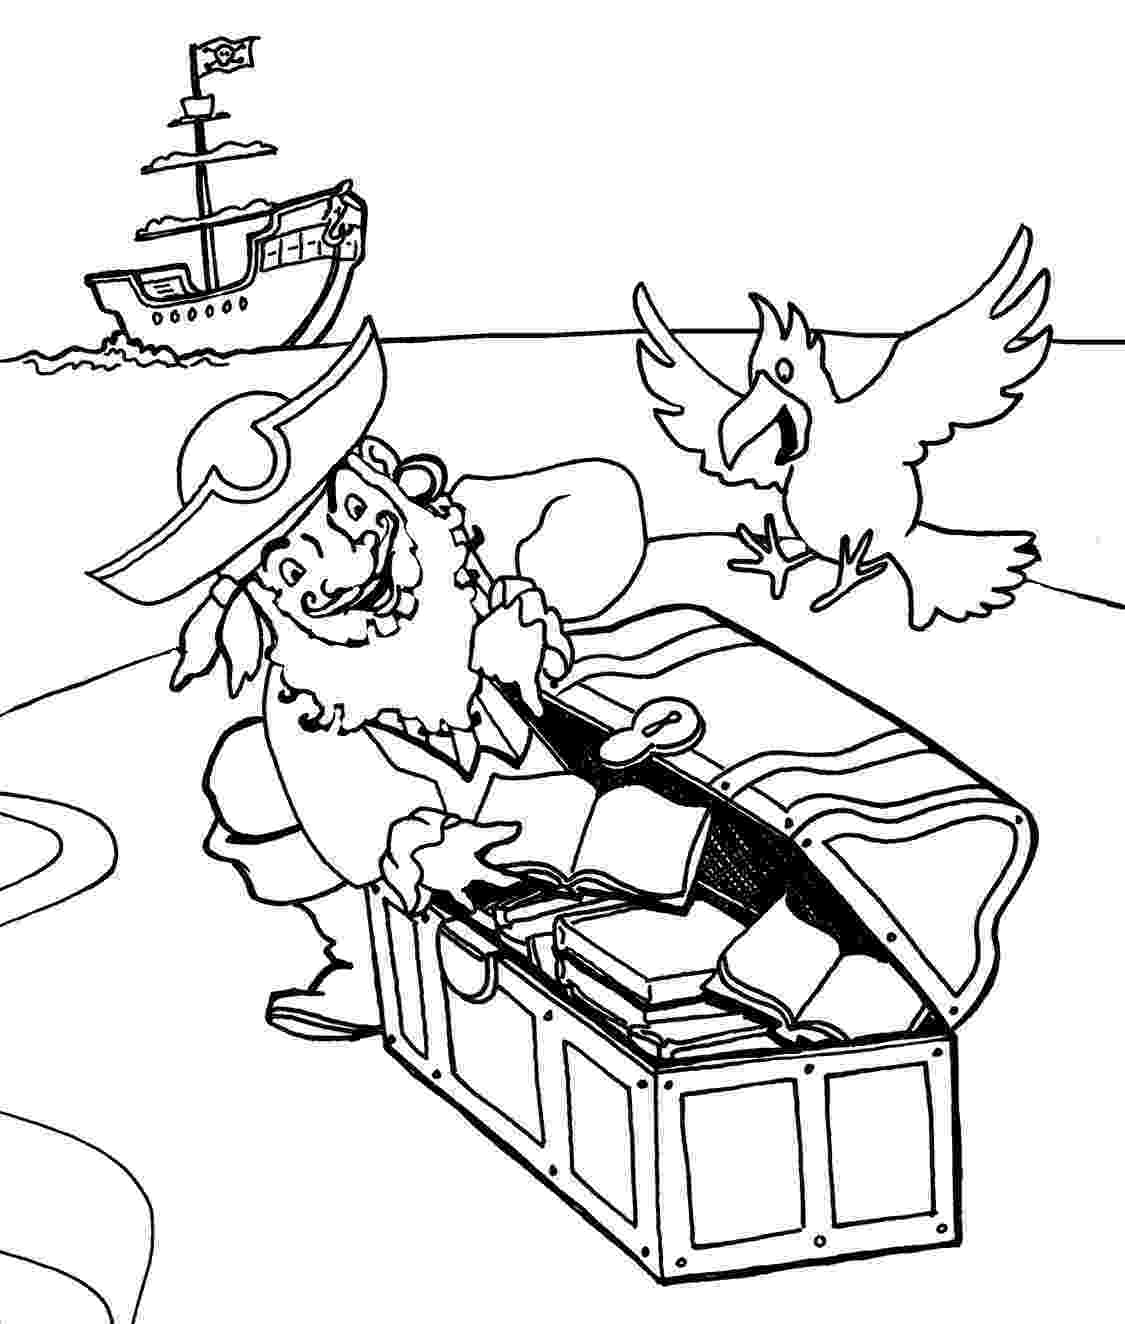 pirate coloring pages for kids 07012013 08012013 colouring for kids pages for kids pirate coloring 